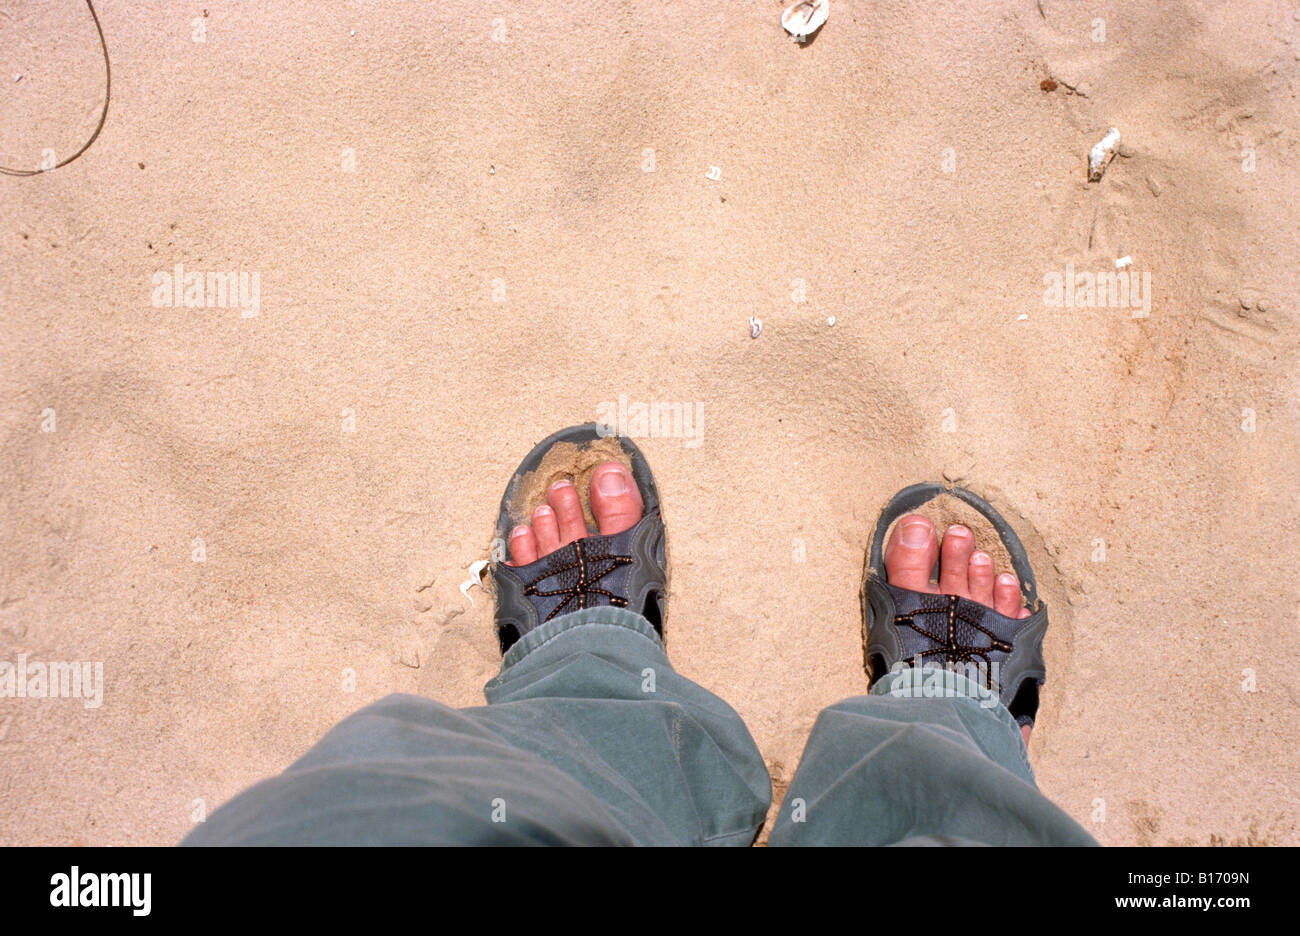 Feet of man standing in dry sand Stock Photo